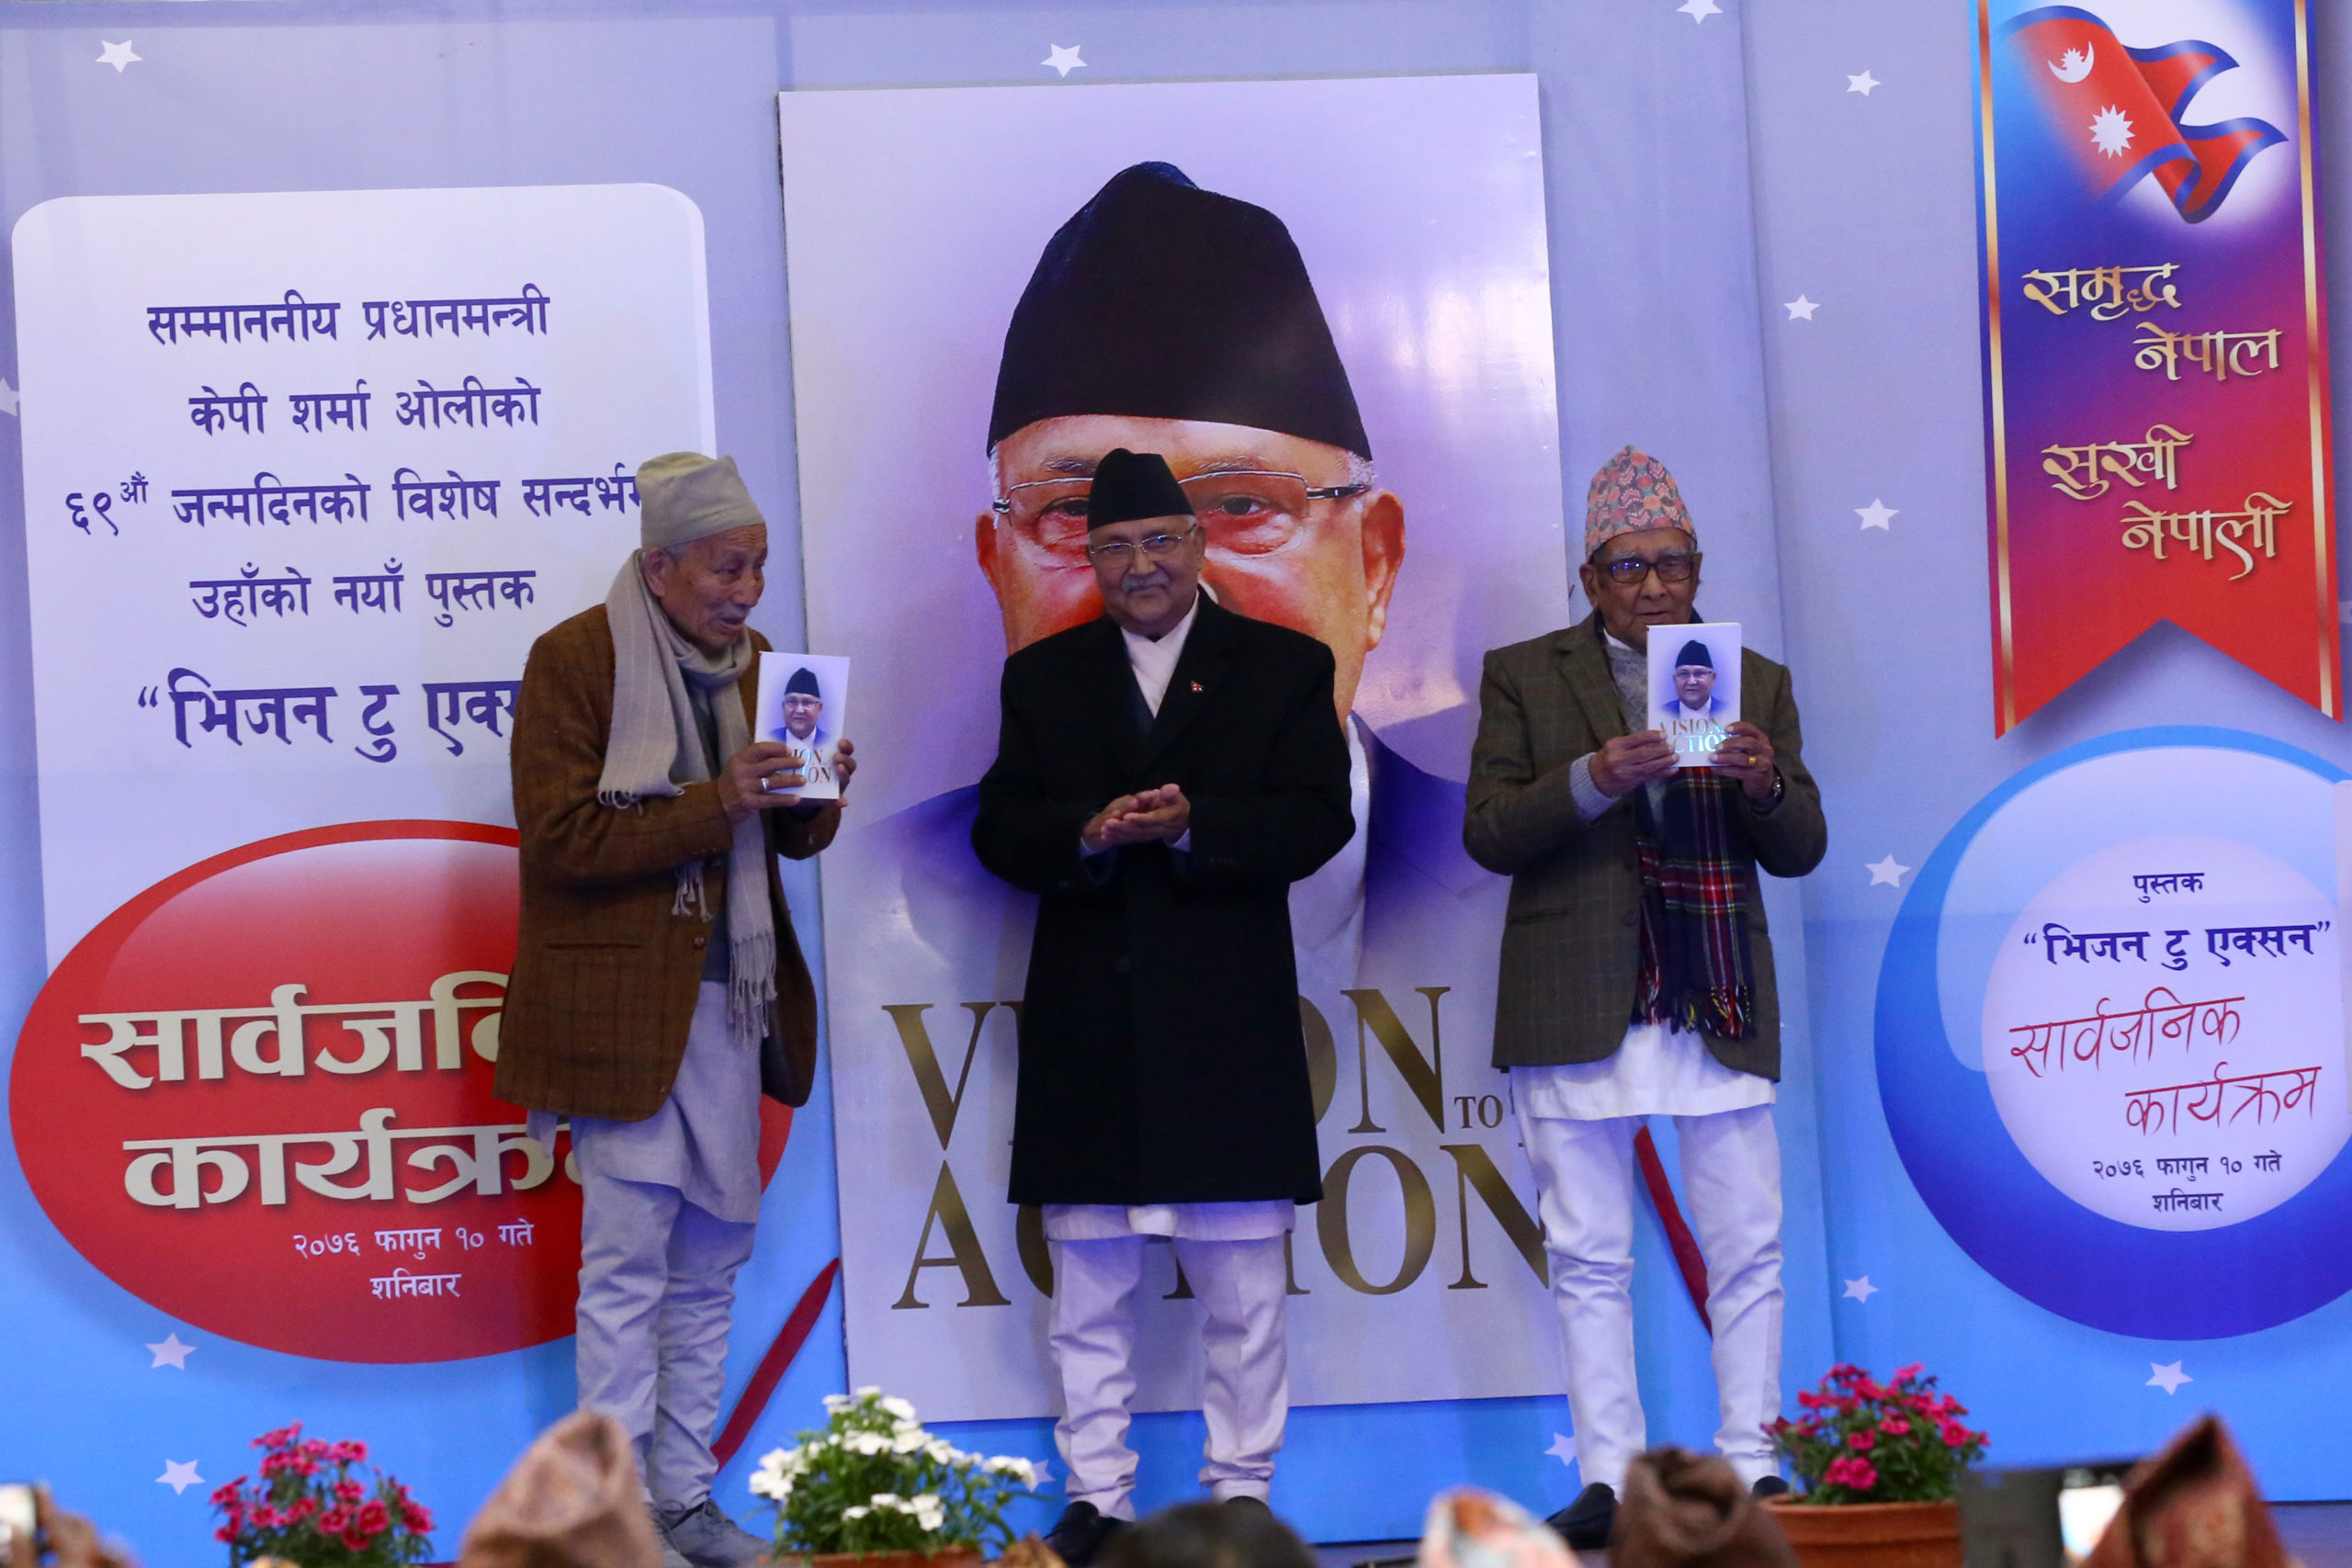 PM Oli’s book ‘Vision to Action’ launched